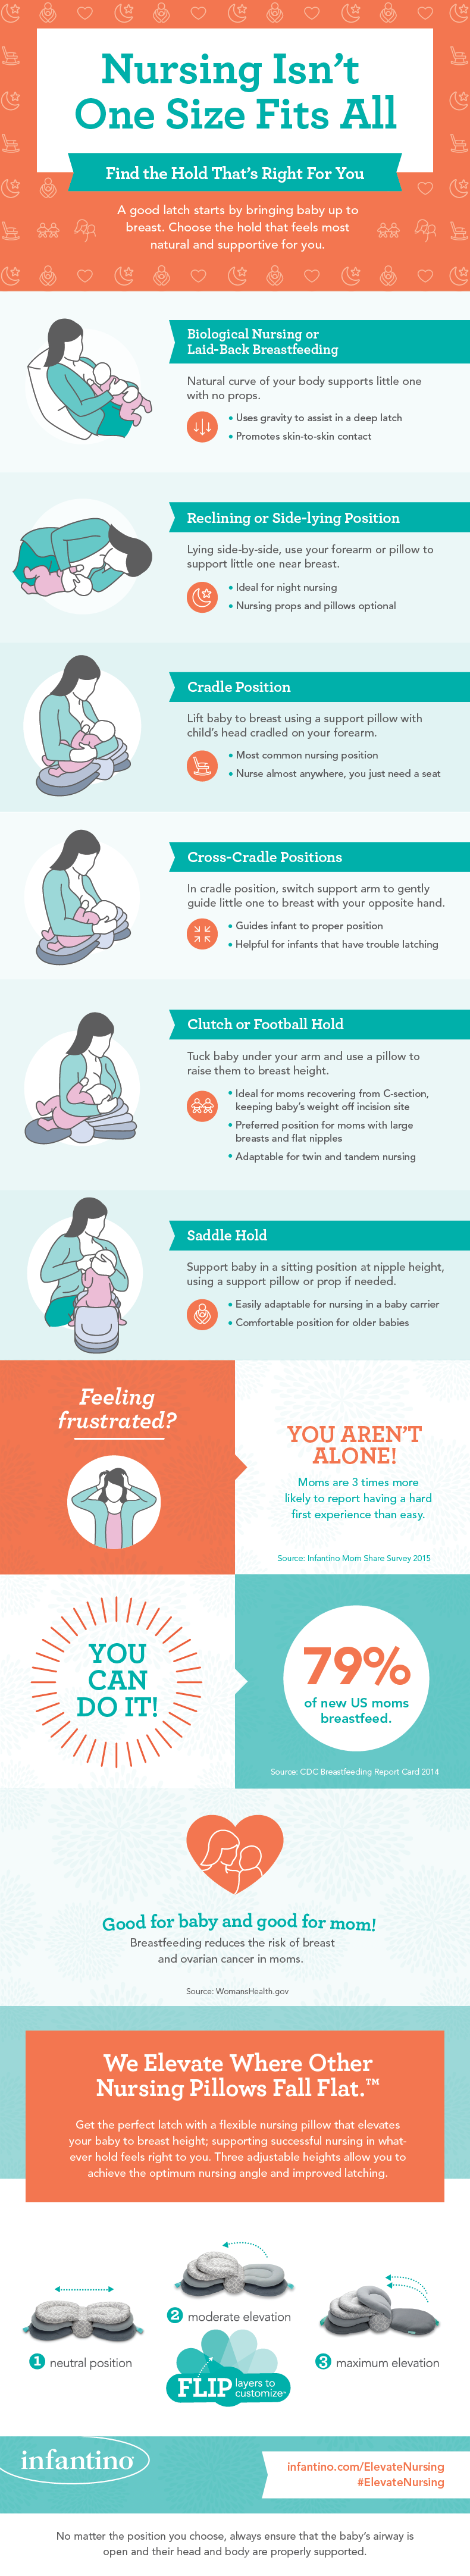  Breastfeeding Infographic: Biological, Reclining, Cradle, Cross-Cradle, Football (or Clutch), and Saddle nursing positions.